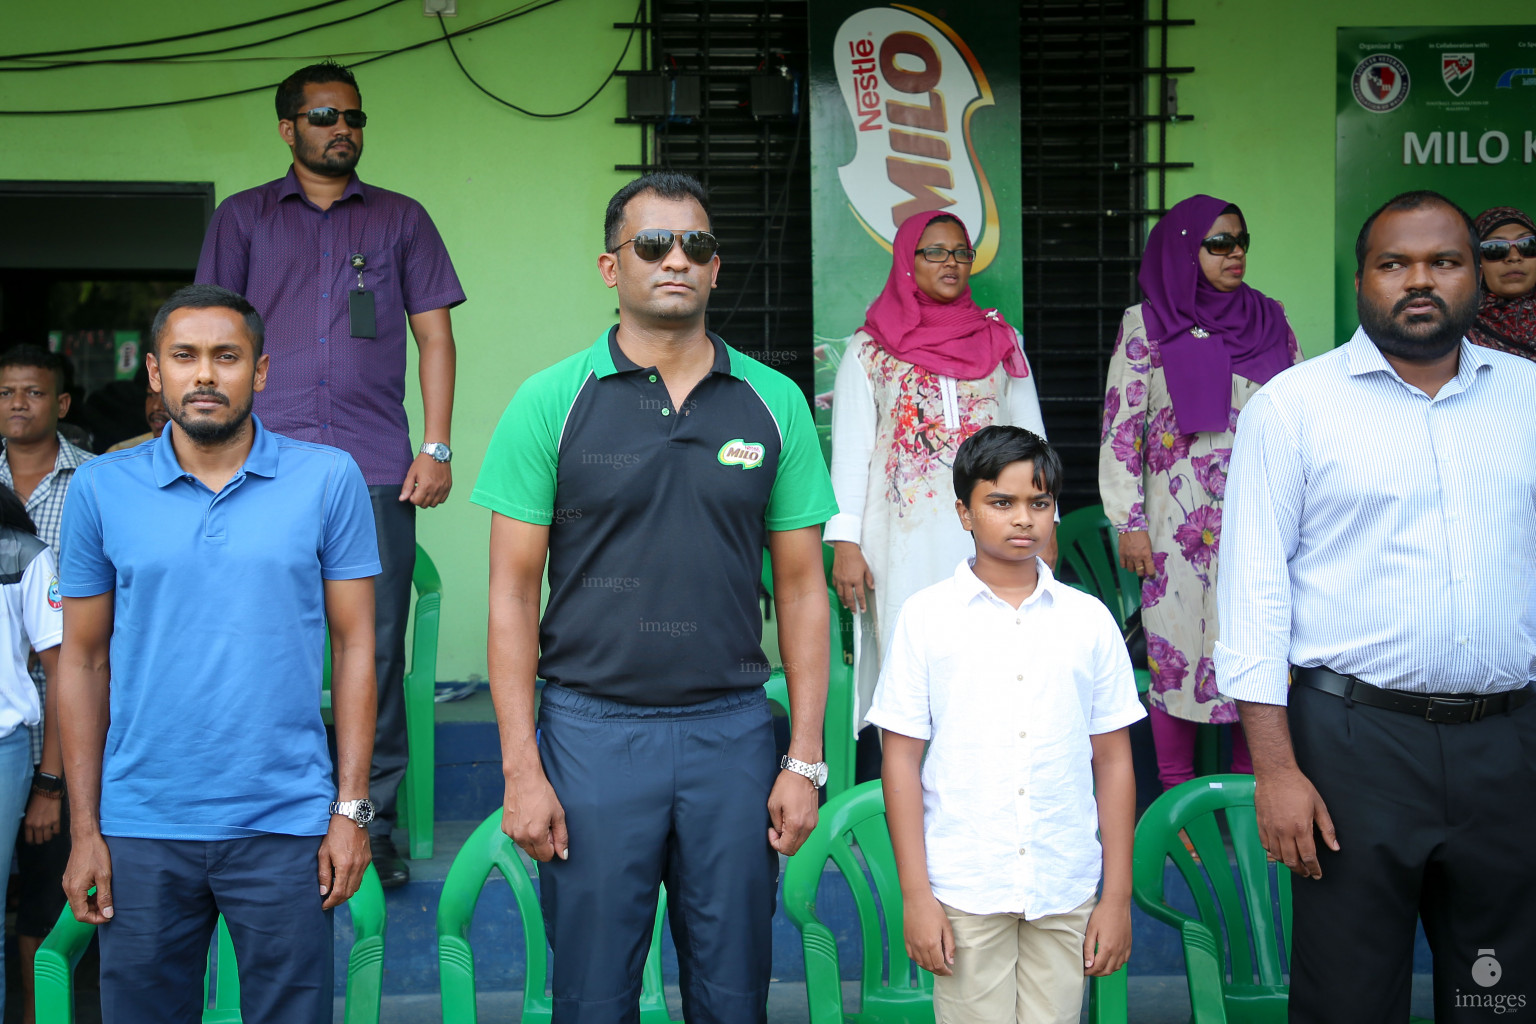 Opening Ceremony of Milo Kids Football Fiesta in Henveiru Grounds in Male', Maldives, Wednesday, Fe20uary 19th 2019 (Images.mv Photo/Ismail Thoriq)